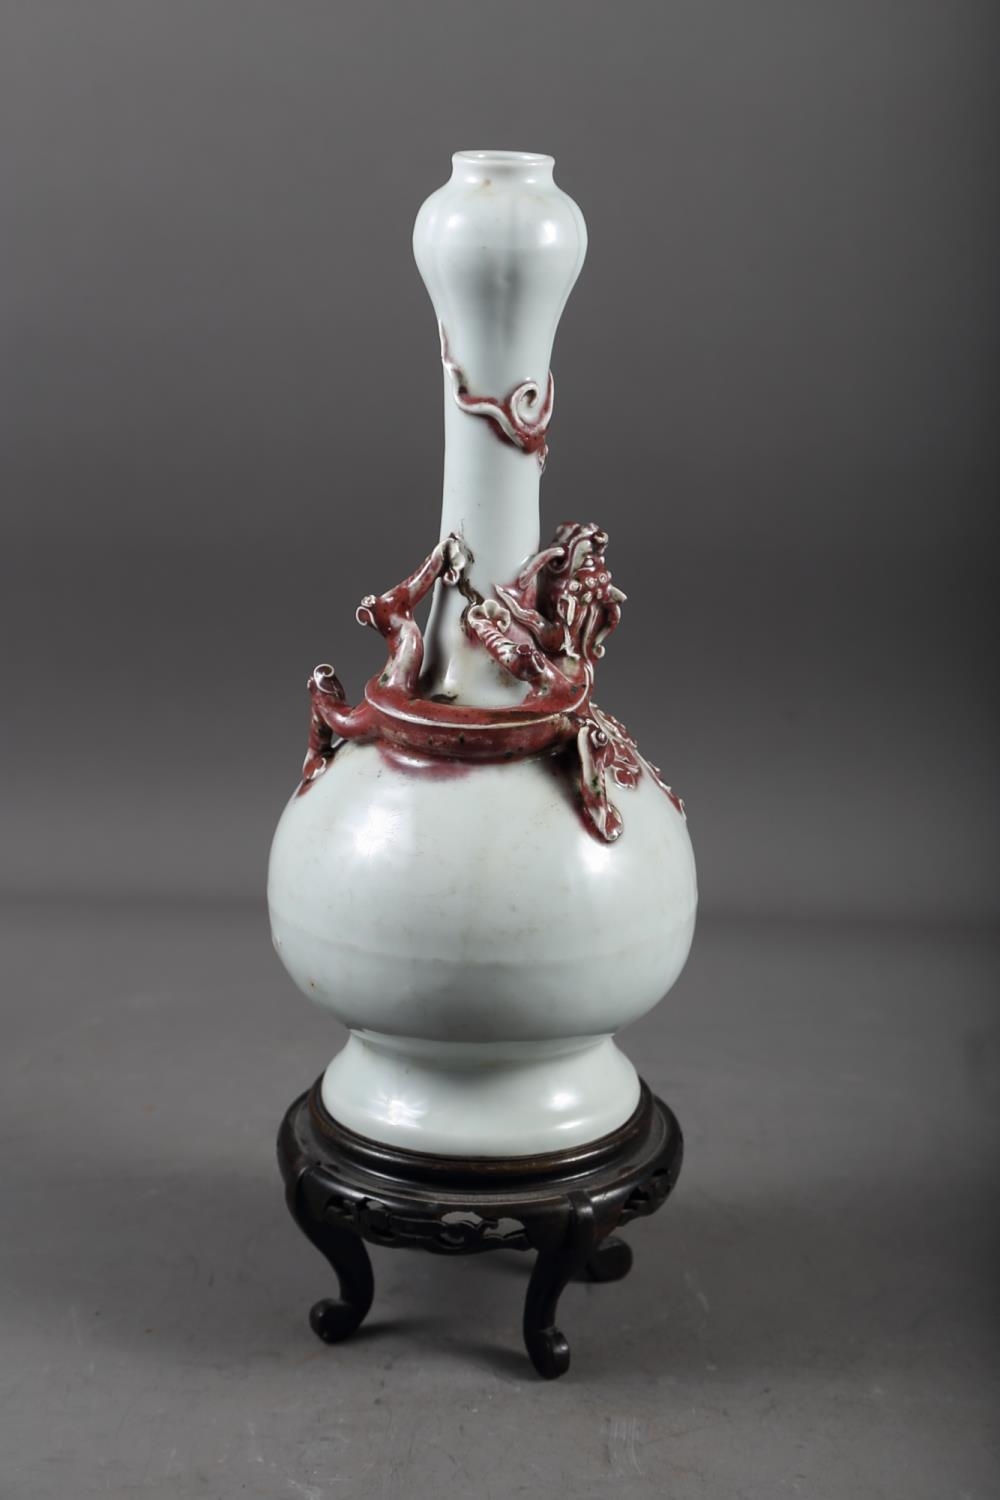 A Chinese pale glazed bottle neck vase with relief iron oxide coloured dragon decoration, 11 3/4"